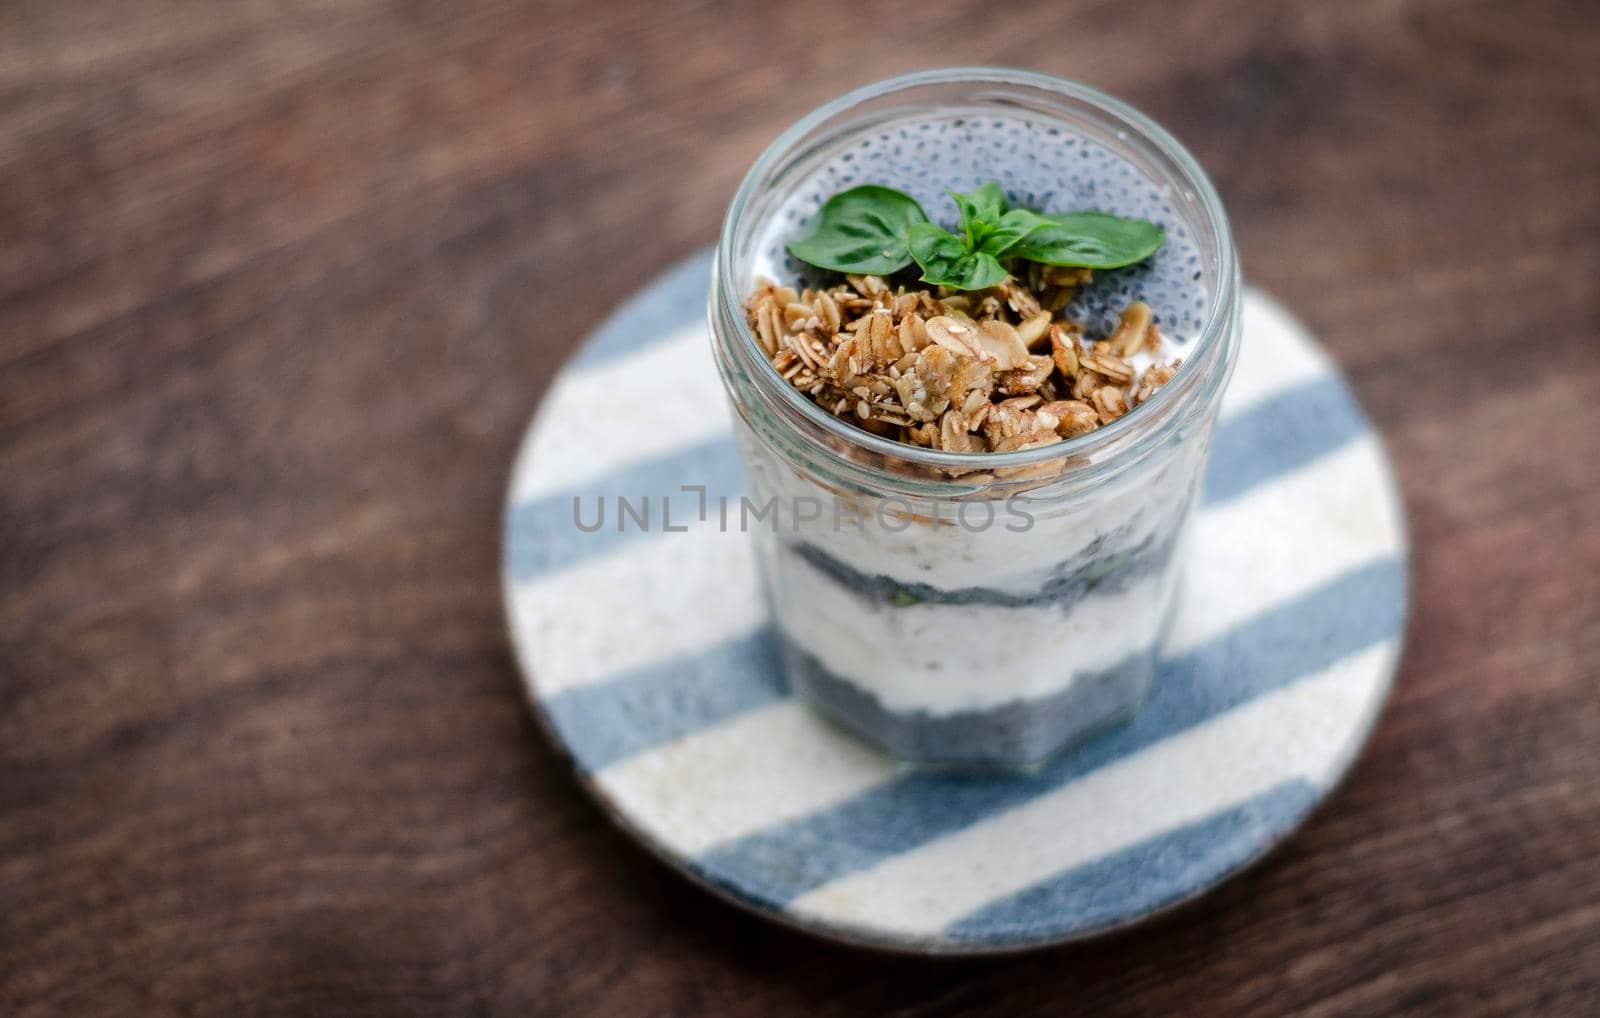 homemade healthy rustic yoghurt and granola with basil seeds breakfast snack cup